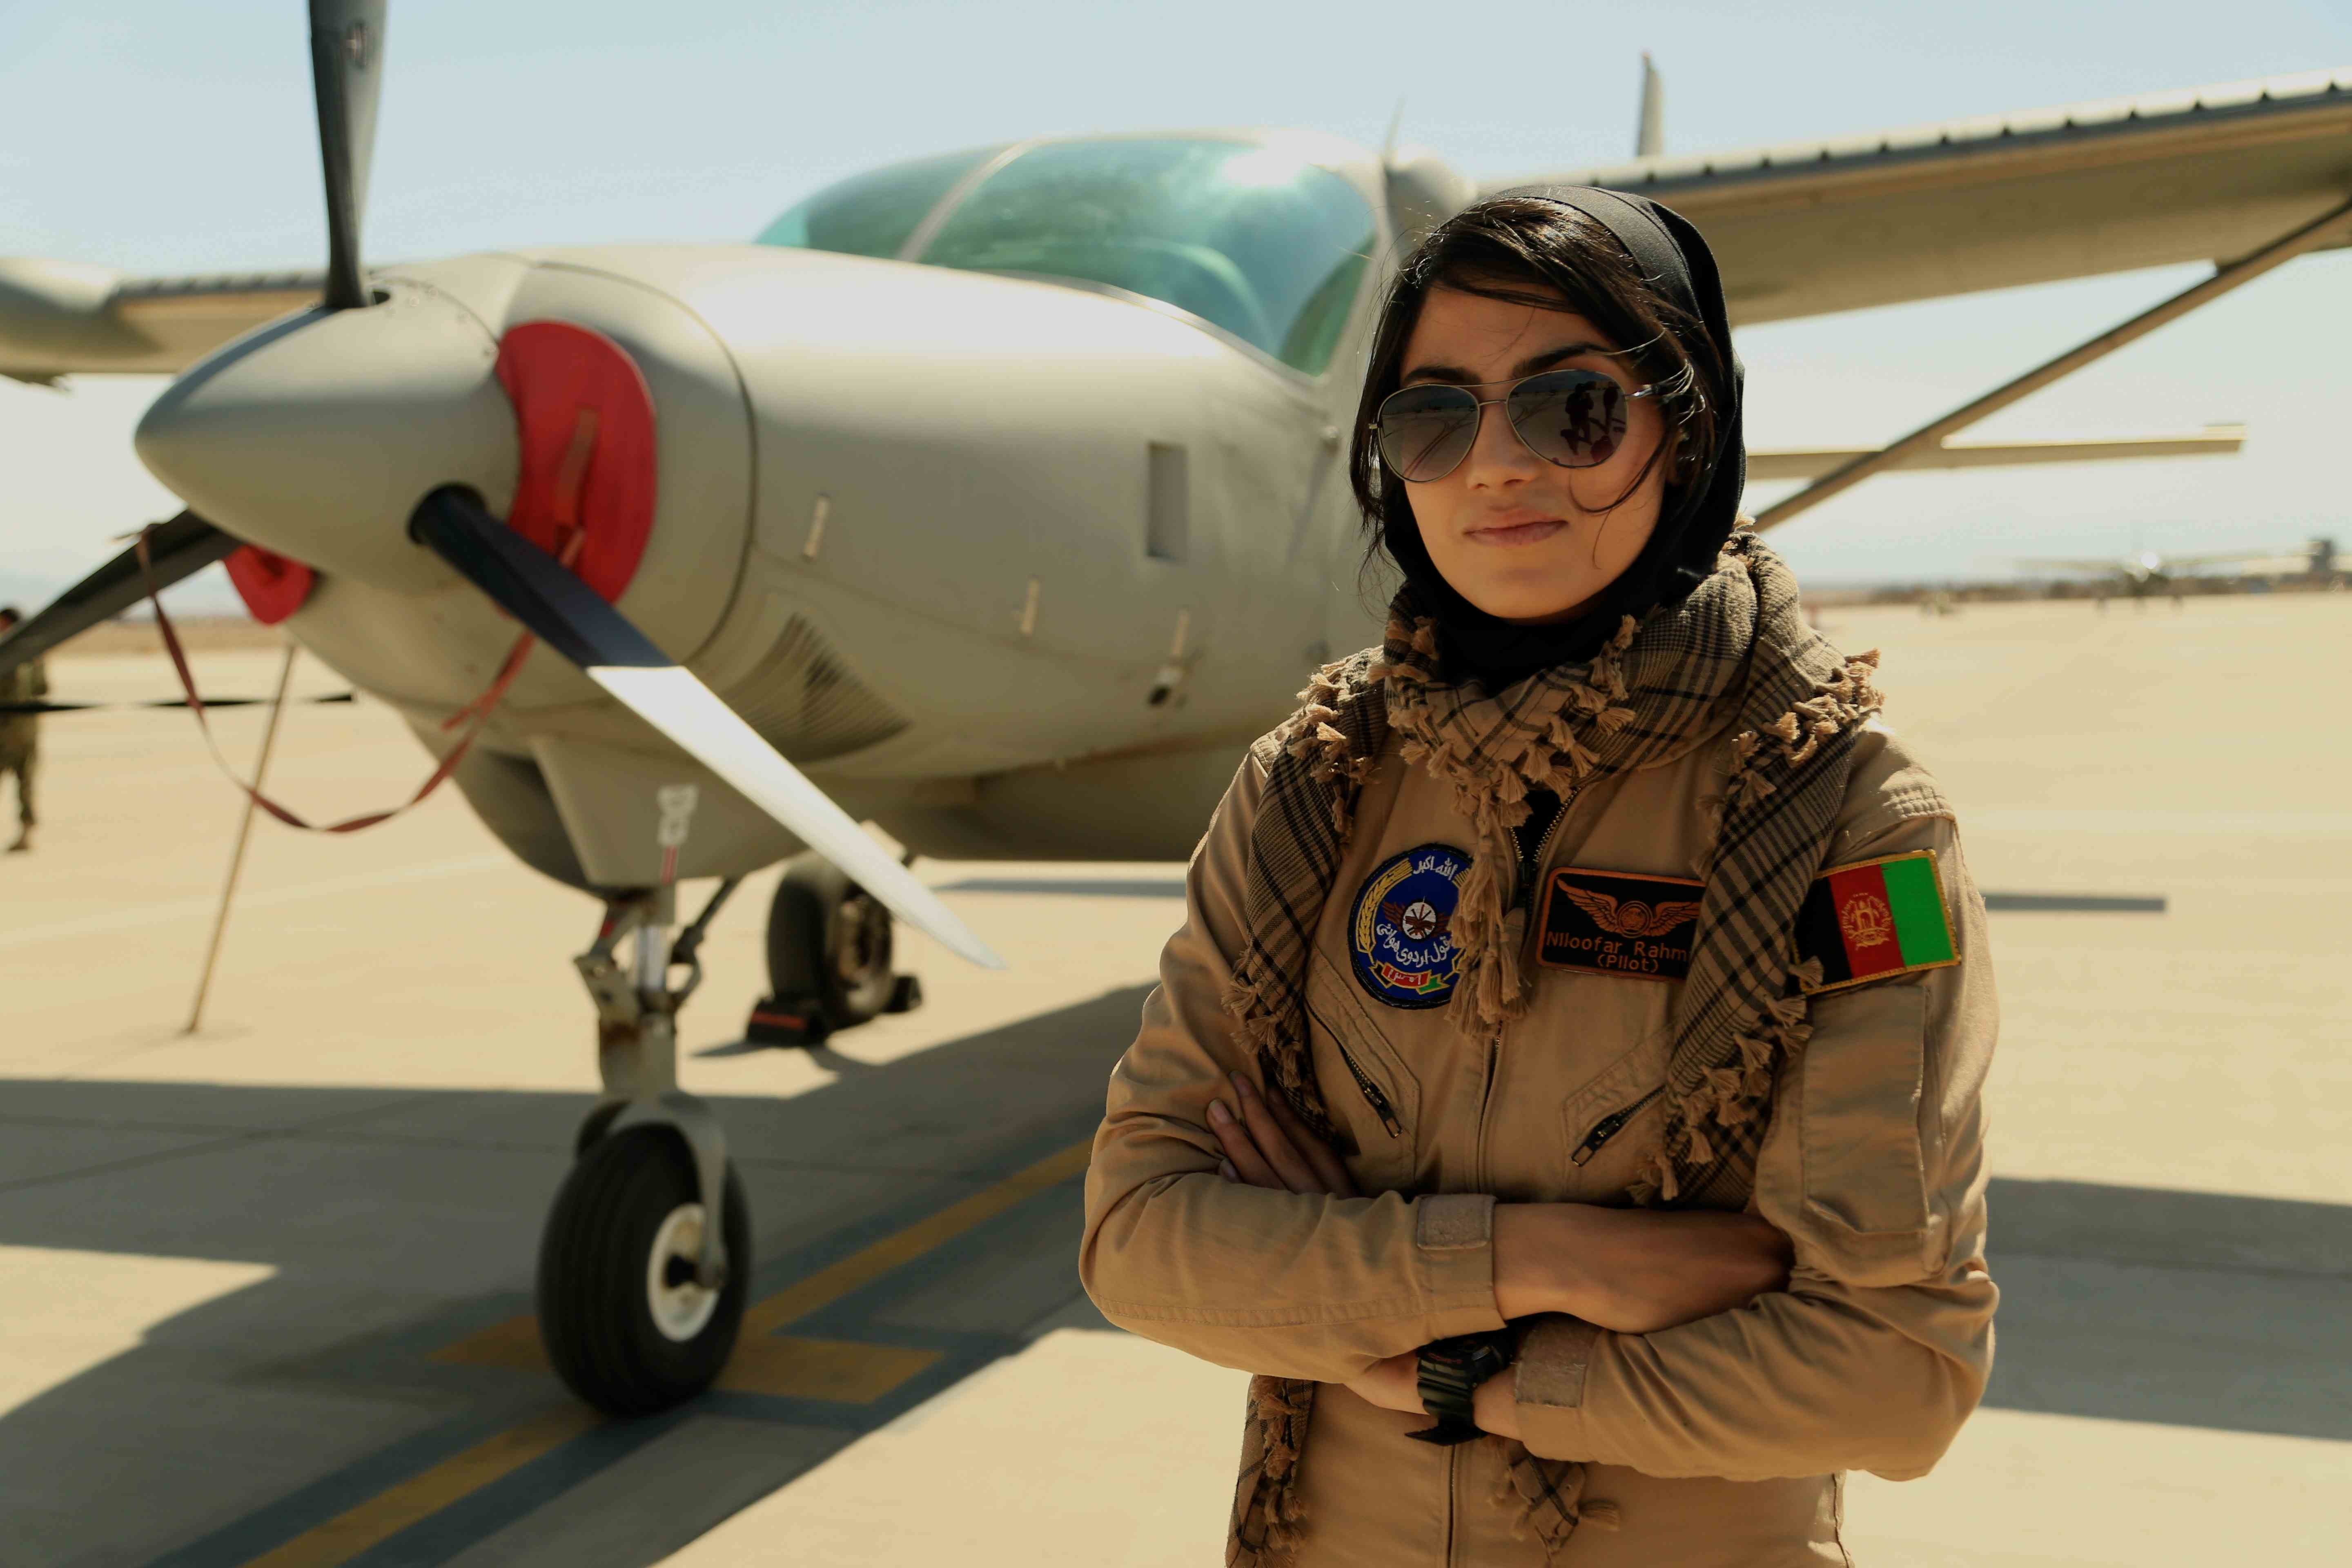 The takeoff of an afghan woman